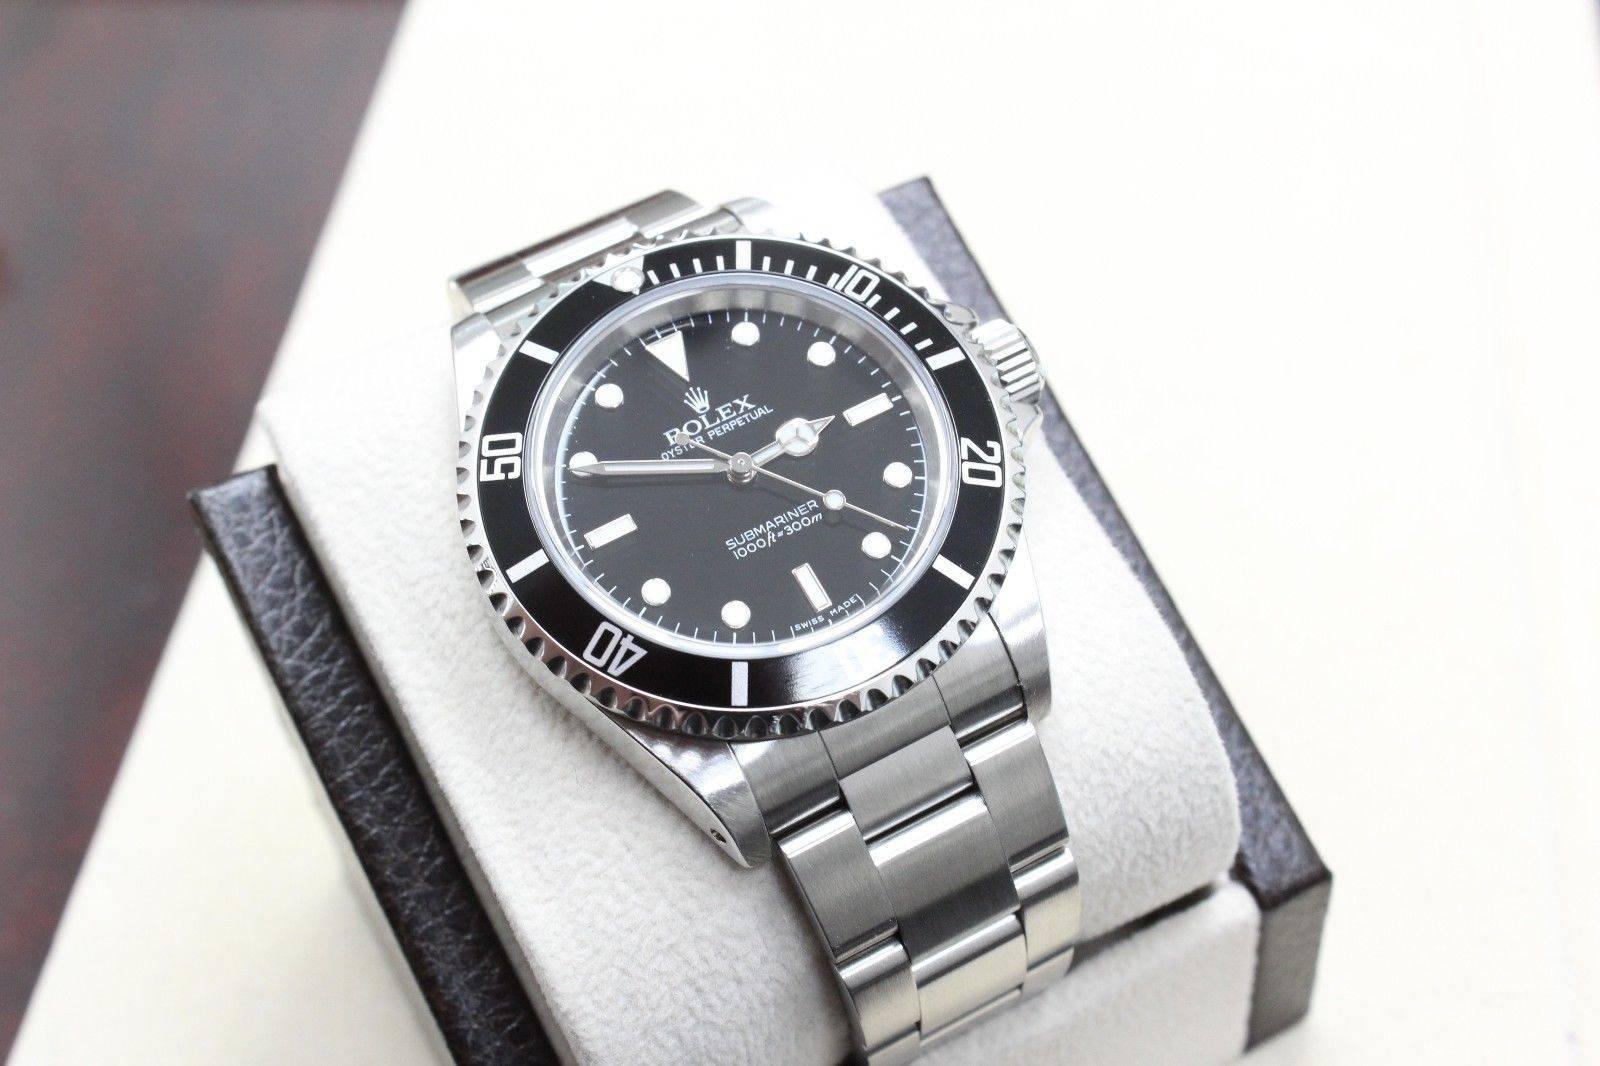 Style Number: 14060
Serial: P343***
Model: Submariner 
Case Material: Stainless Steel
Band: Stainless Steel
Bezel: Black
Dial: Black
Face: Sapphire Crystal 
Case Size: 40mm

Includes: 
-Rolex Box & Papers
-Certified Appraisal 
-6 Month